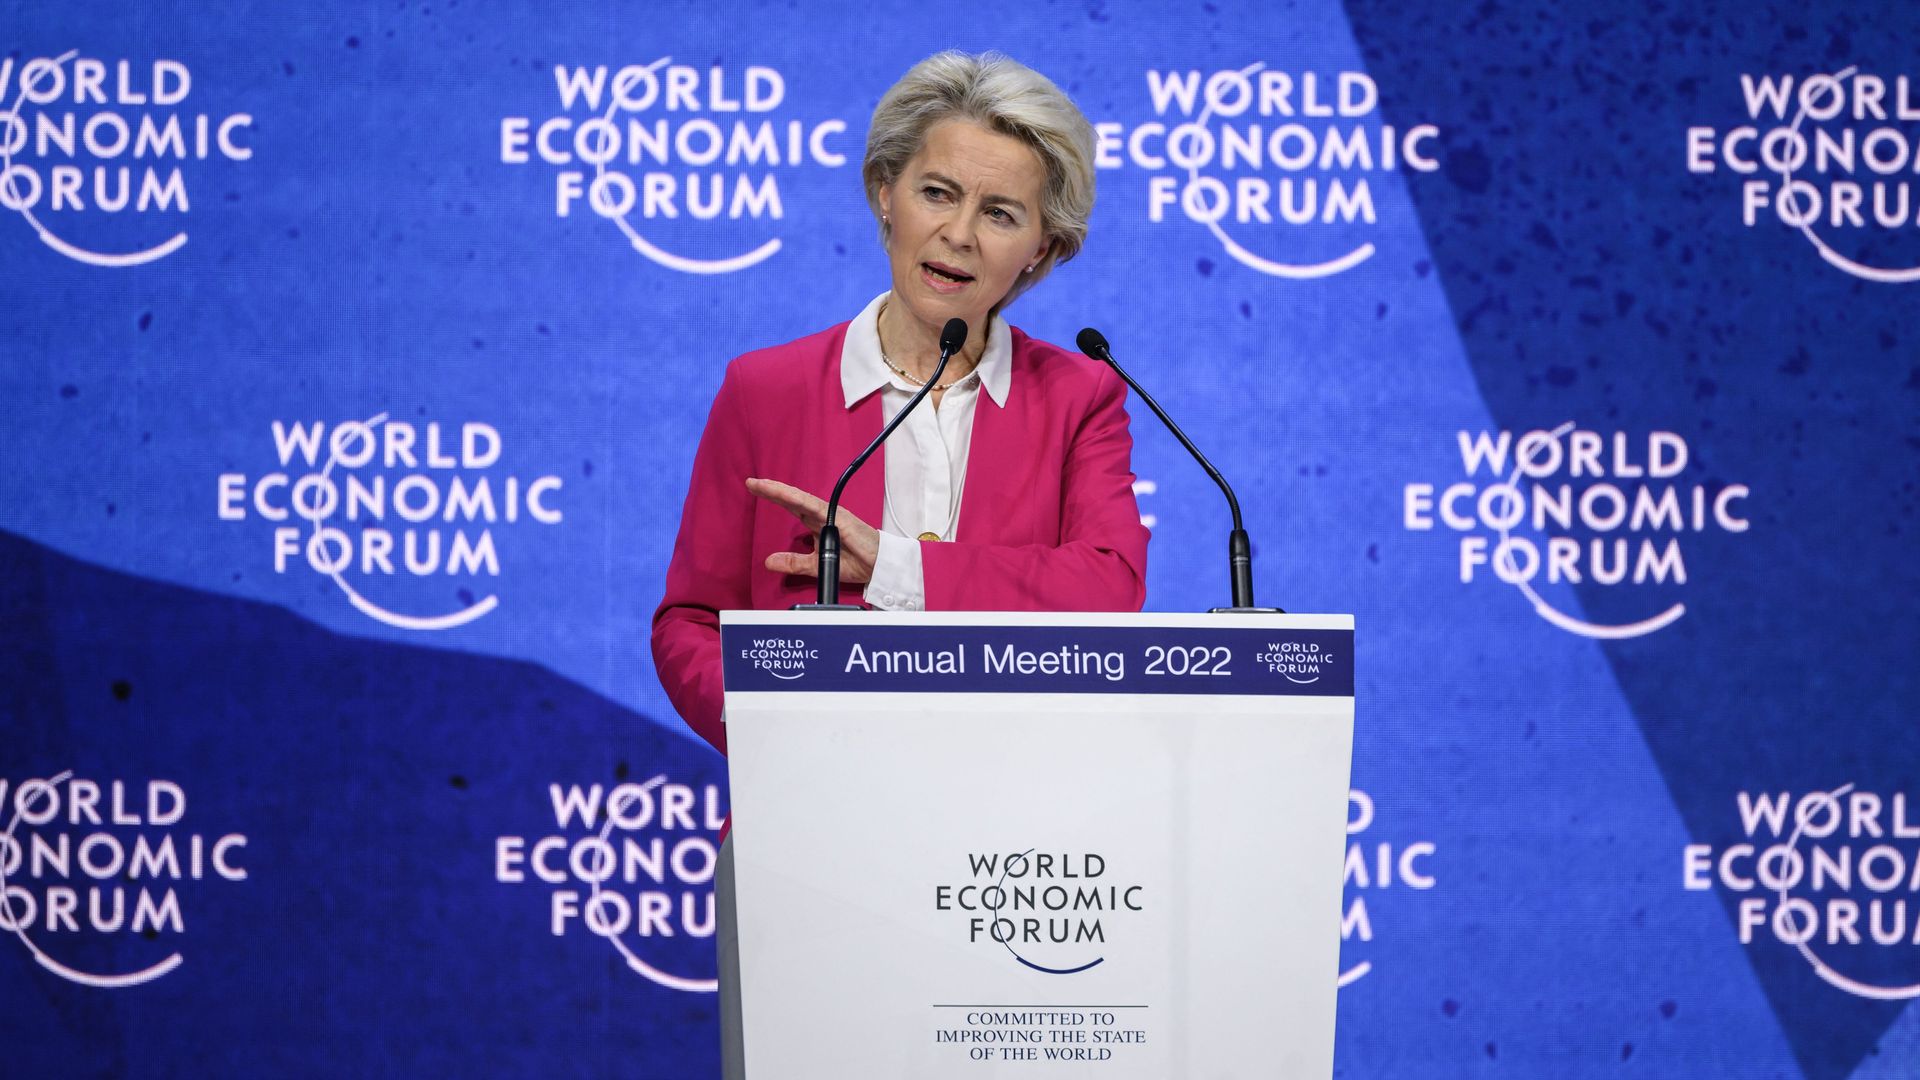 European Commission President Ursula von der Leyen addresses the assembly at the World Economic Forum (WEF) annual meeting in Davos on May 24.